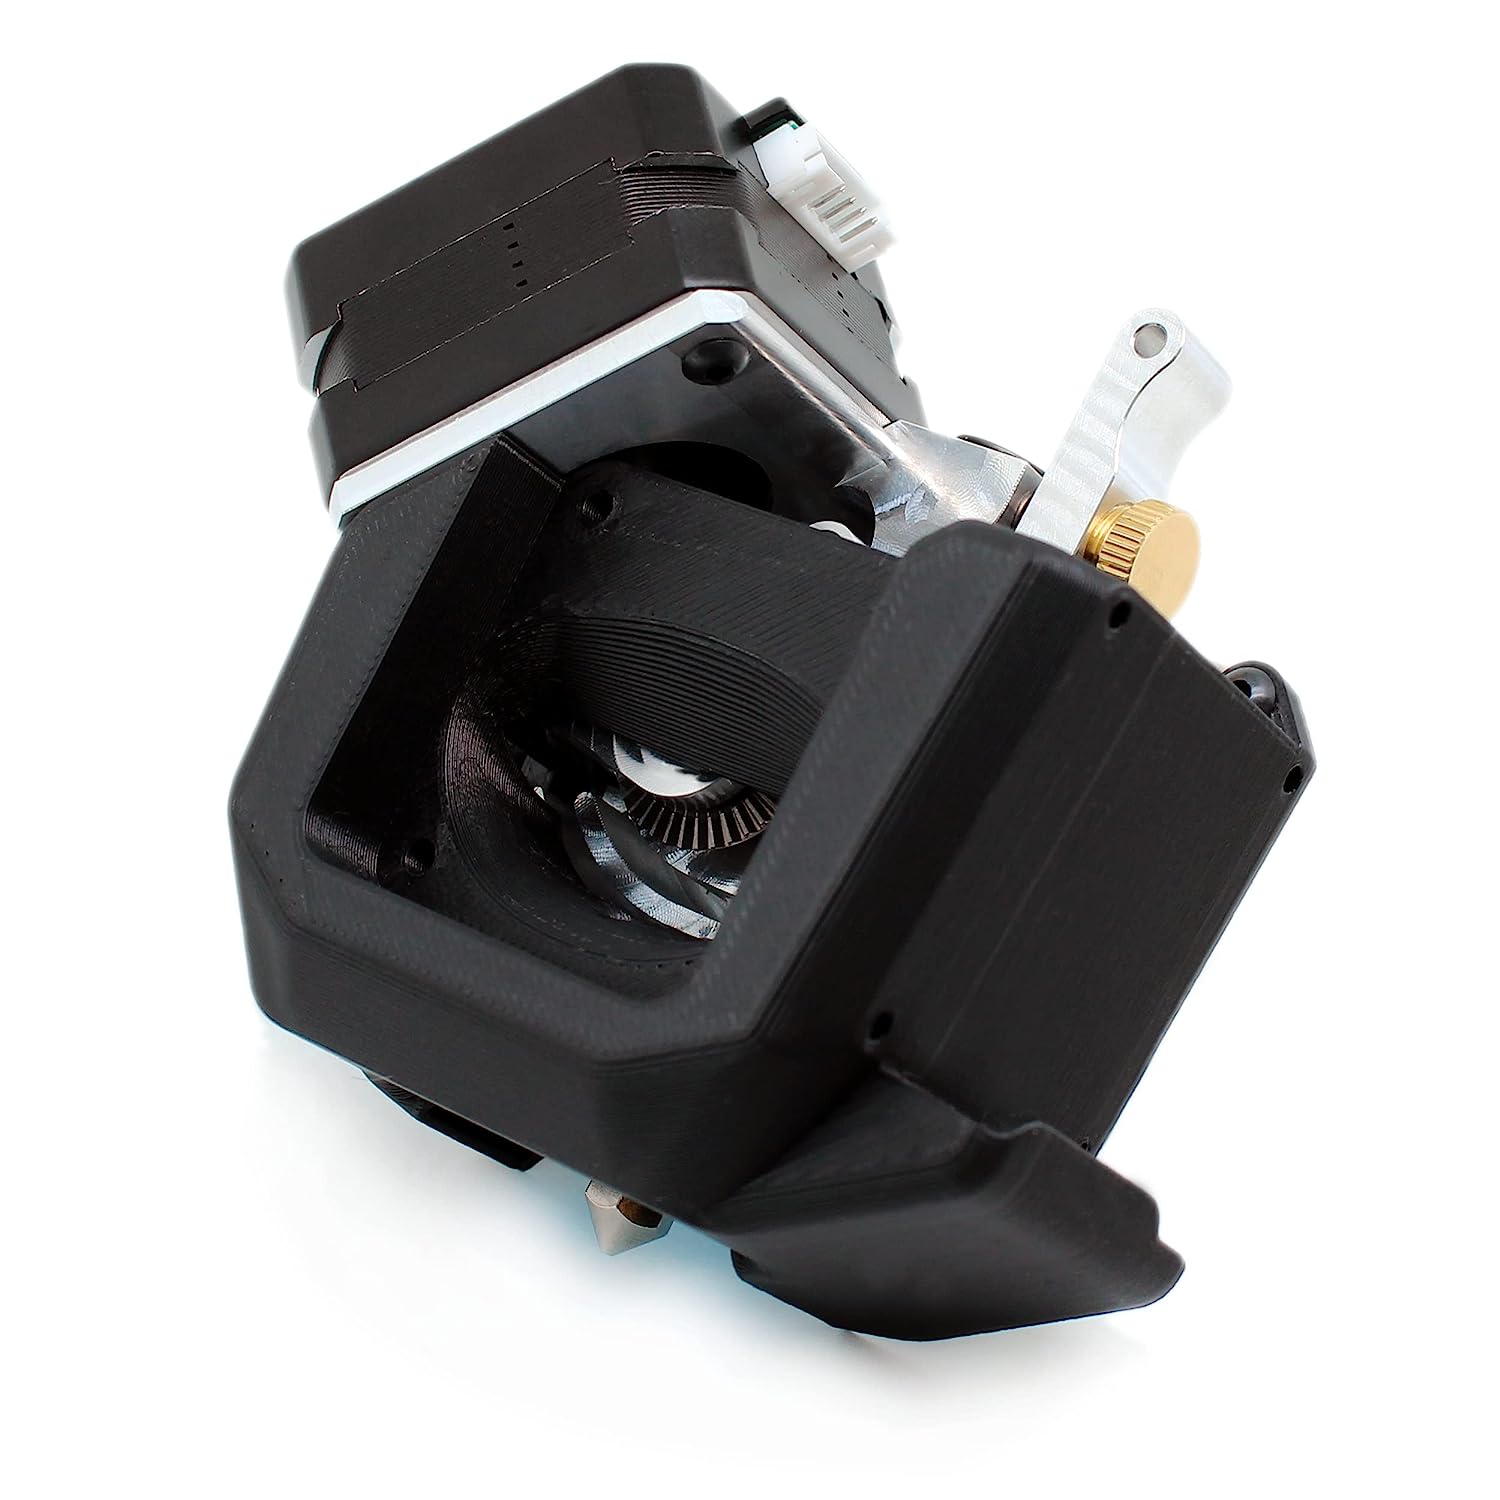 Micro Swiss NG™ Direct Drive Extruder for Creality [...]